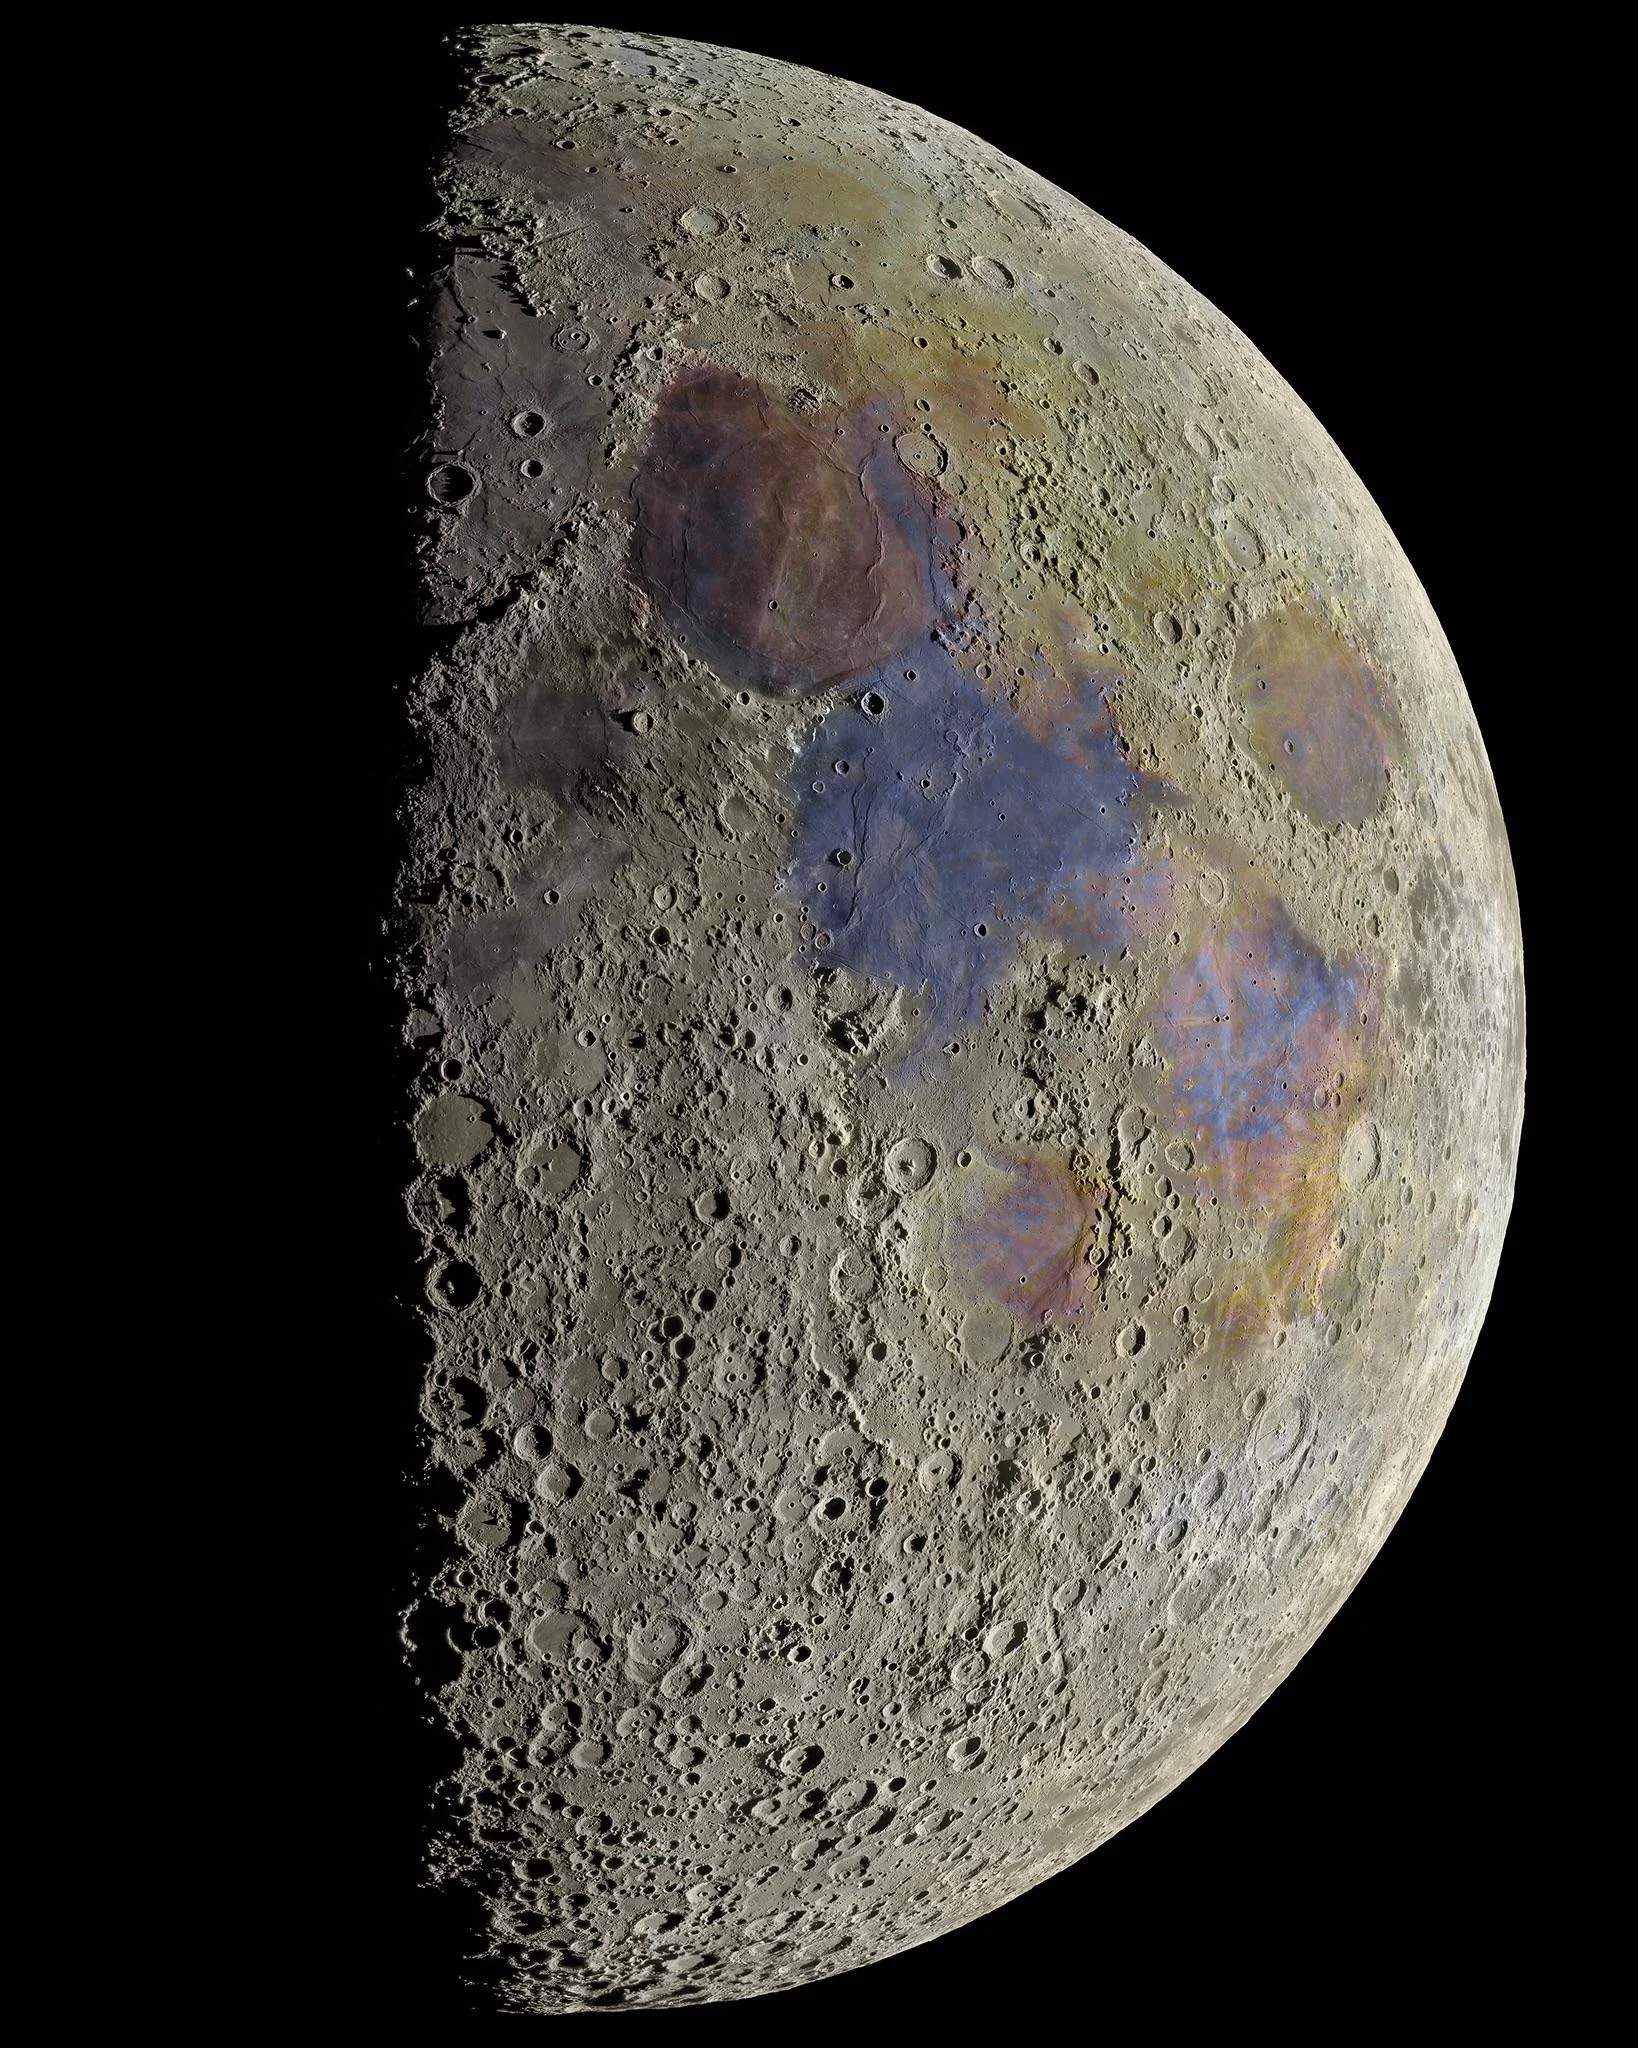 Extremely high res moon photo, with enhanced colours. The surface is pockmarked and traces of different elements are apparent across the surface.